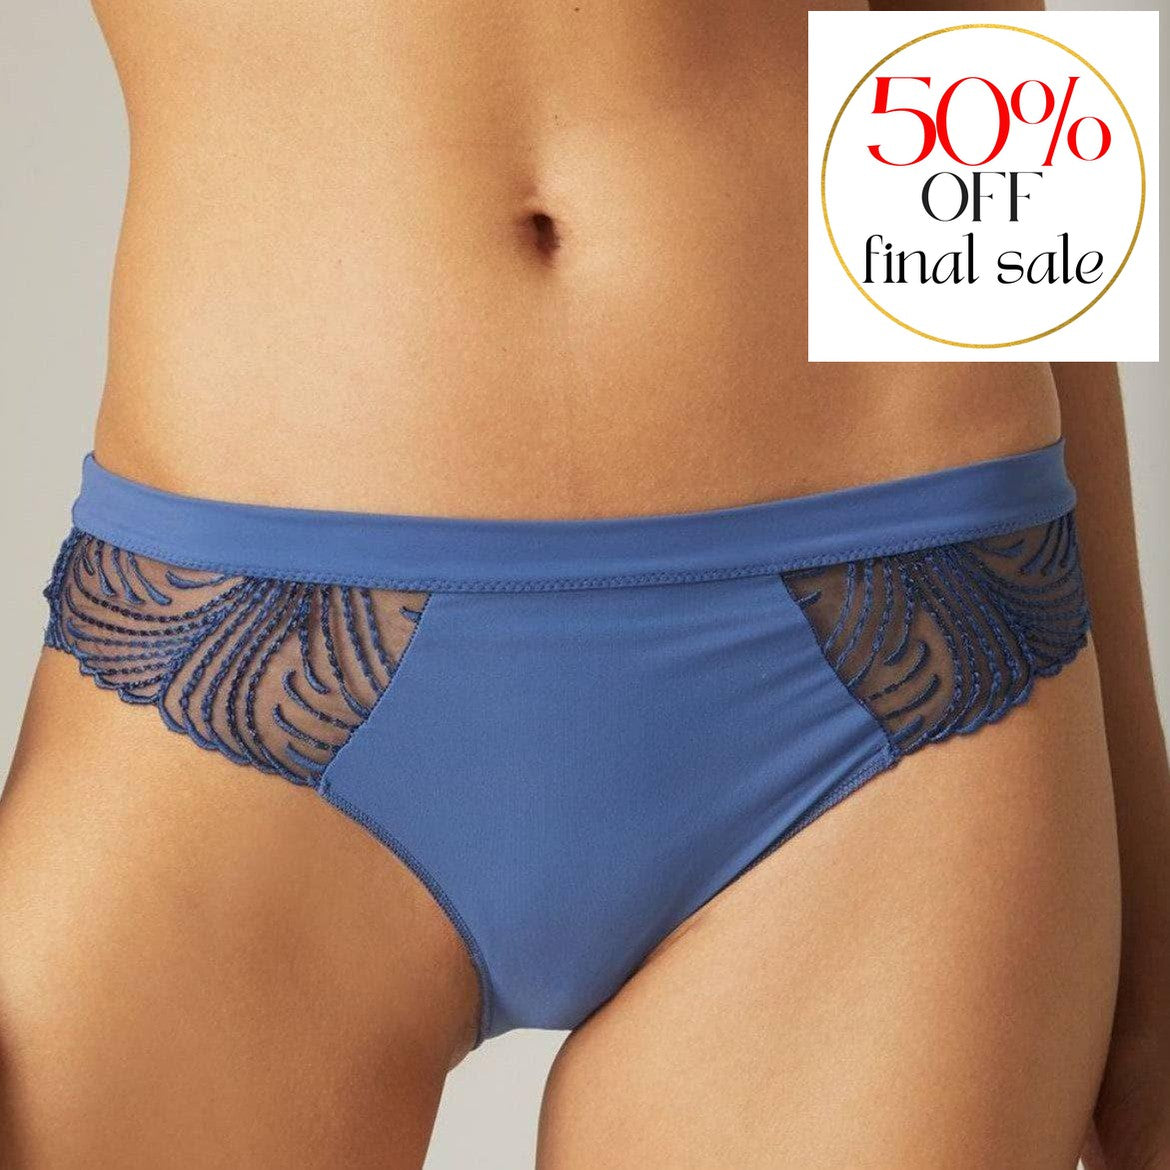 Simone Perele Nuance Thong in Denim Blue 12N700-Panties-Simone Perele-Denim Blue-XSmall (1)-Anna Bella Fine Lingerie, Reveal Your Most Gorgeous Self!